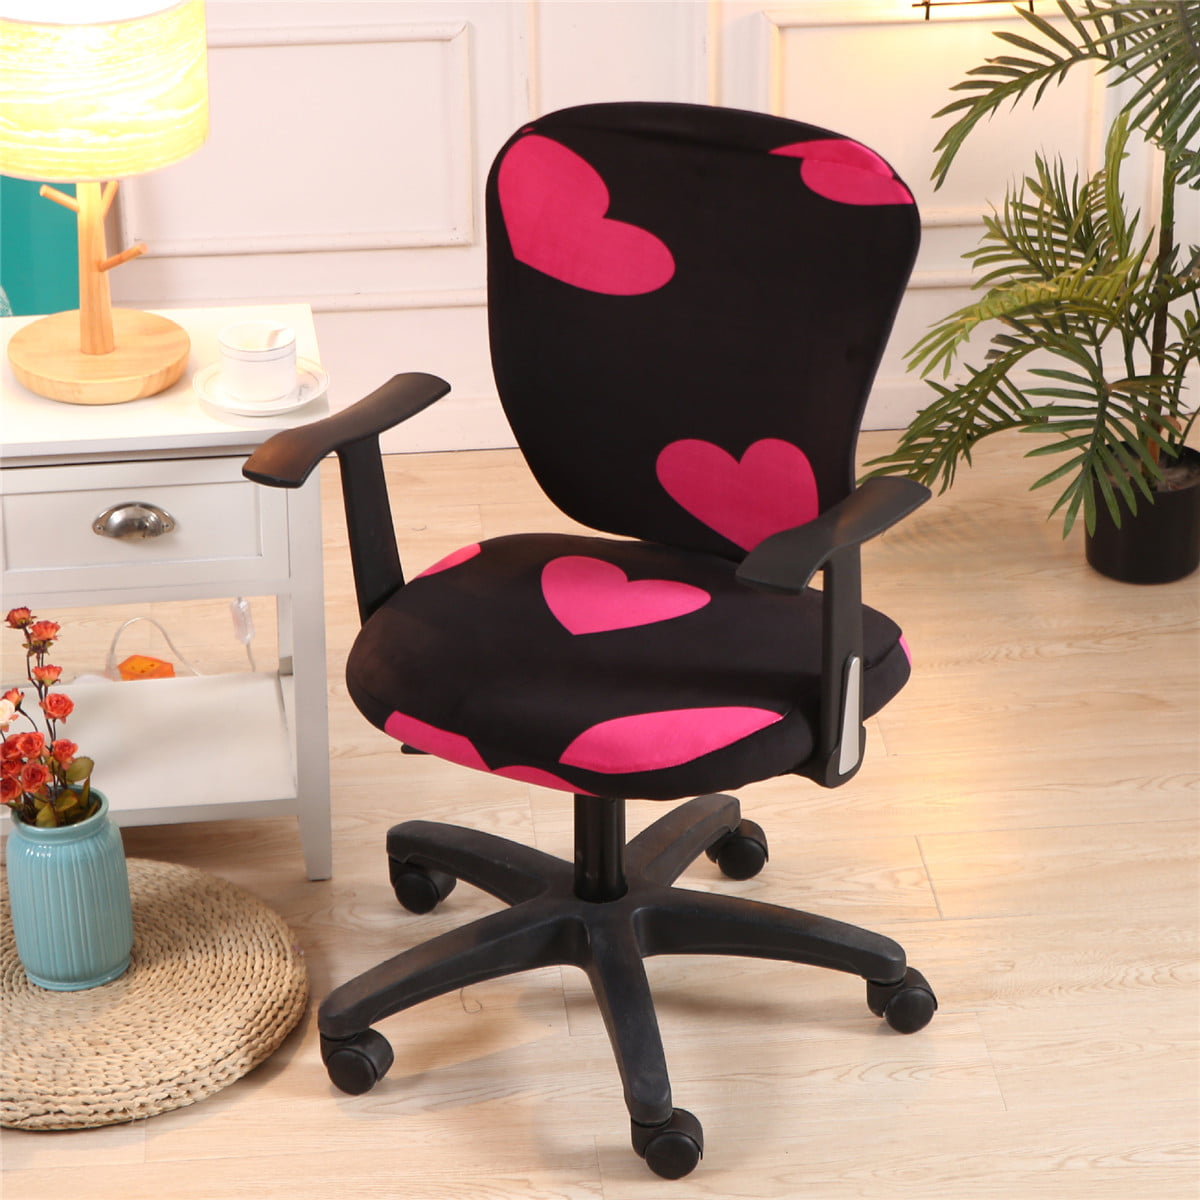 TODAYTOP Spandex Chair Seat Cover Stretch Jacquard Office Computer Chair Seat Covers Removable Washable Anti-dust Desk Chair Seat Cushion Protectors 